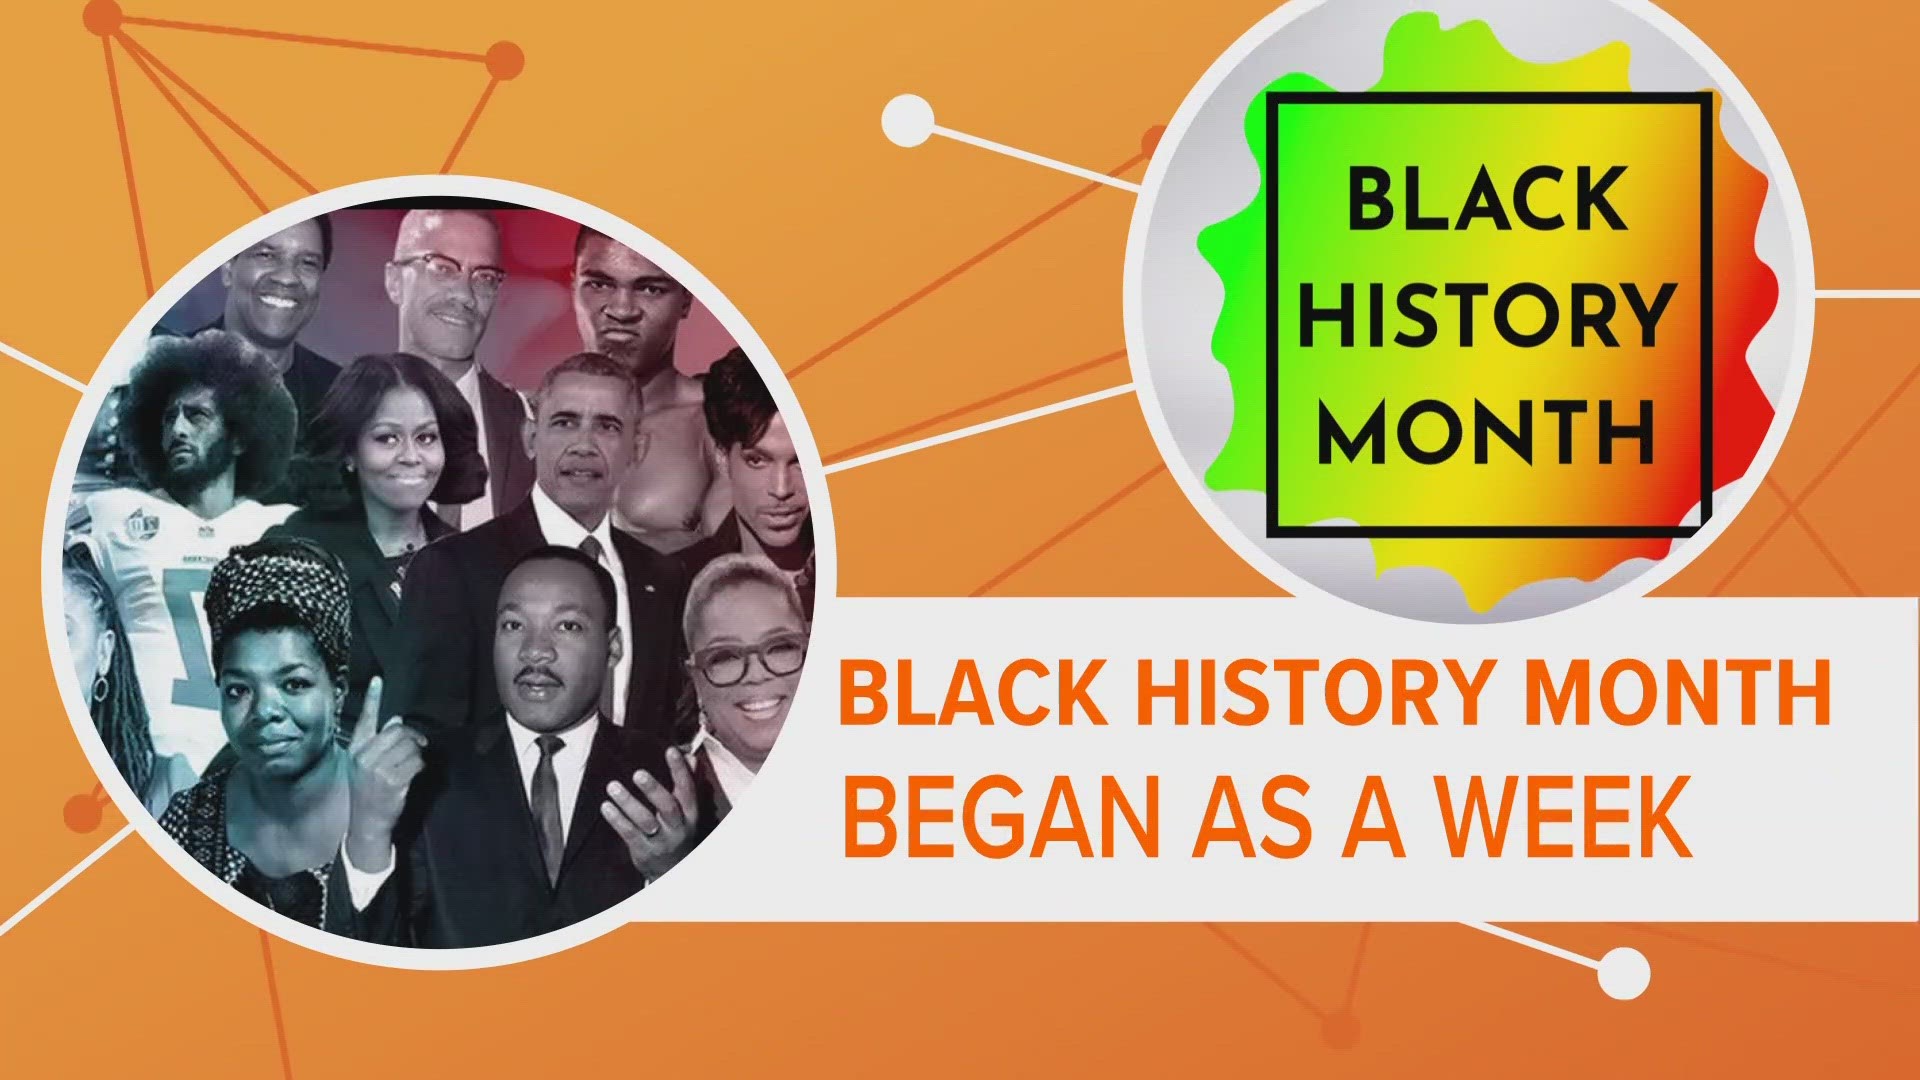 February 1 marks the beginning of Black History Month. Today we explain how it started and also how it has changed along the way.